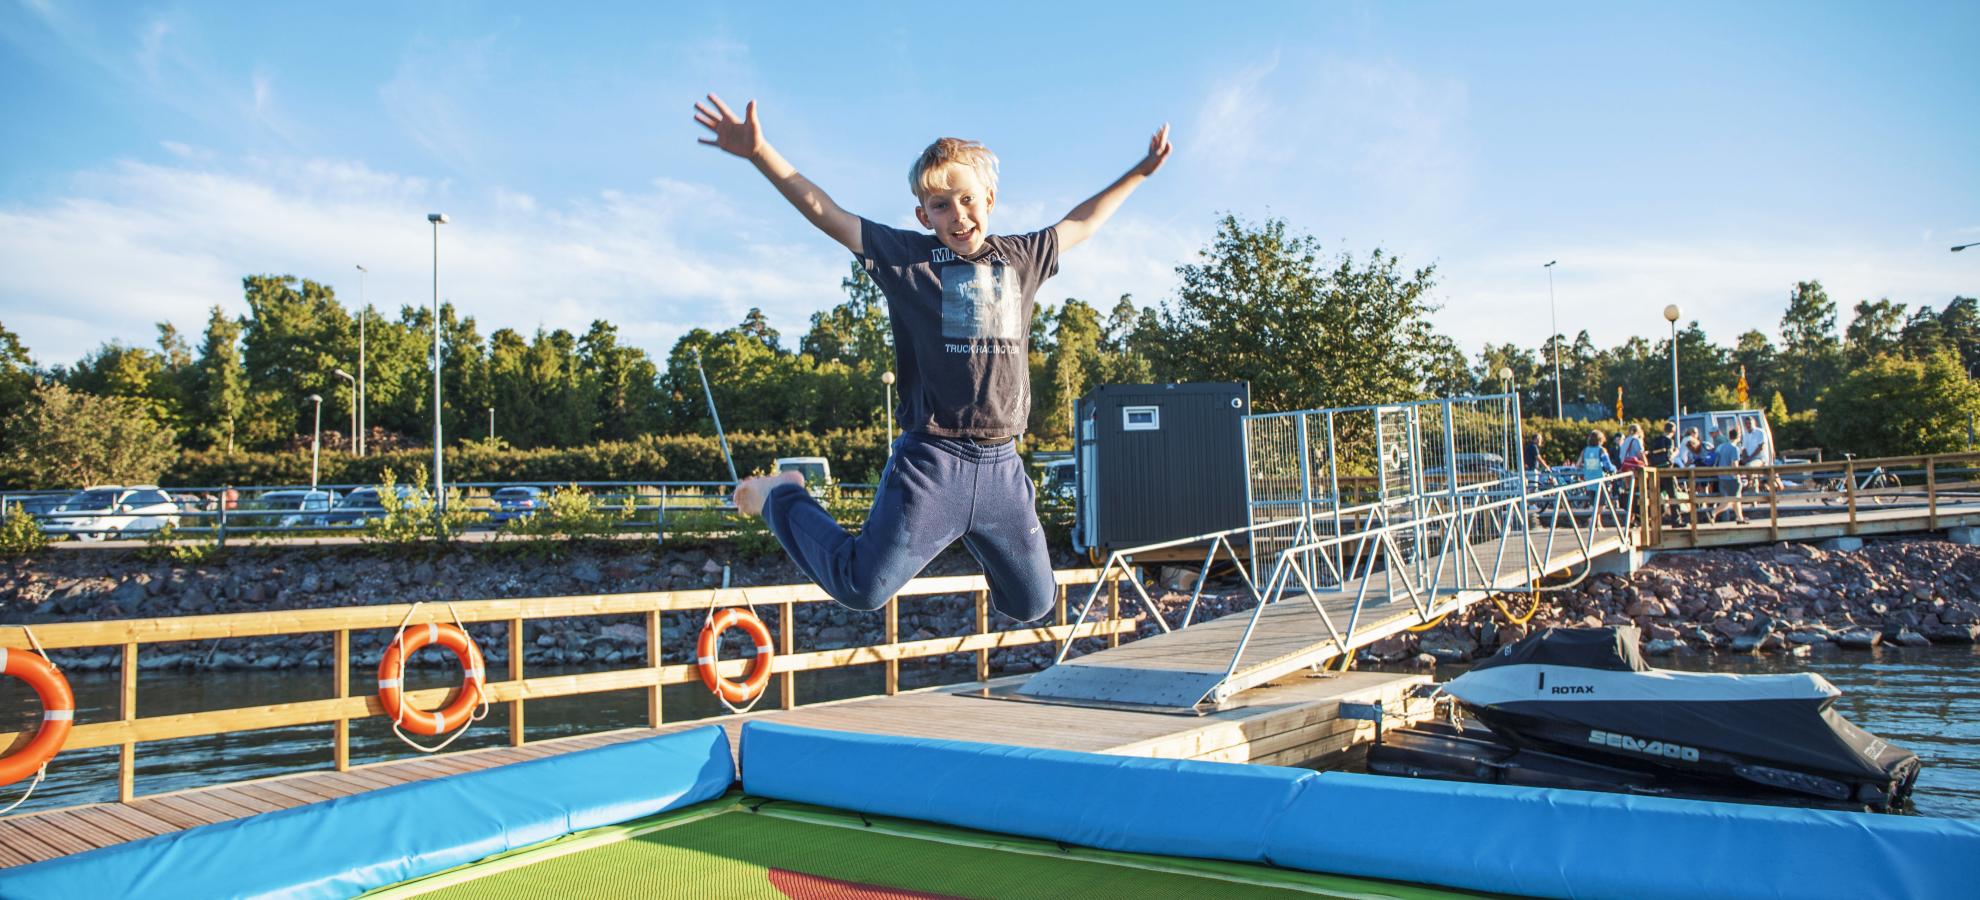 A boy jumping on the water trampoline.